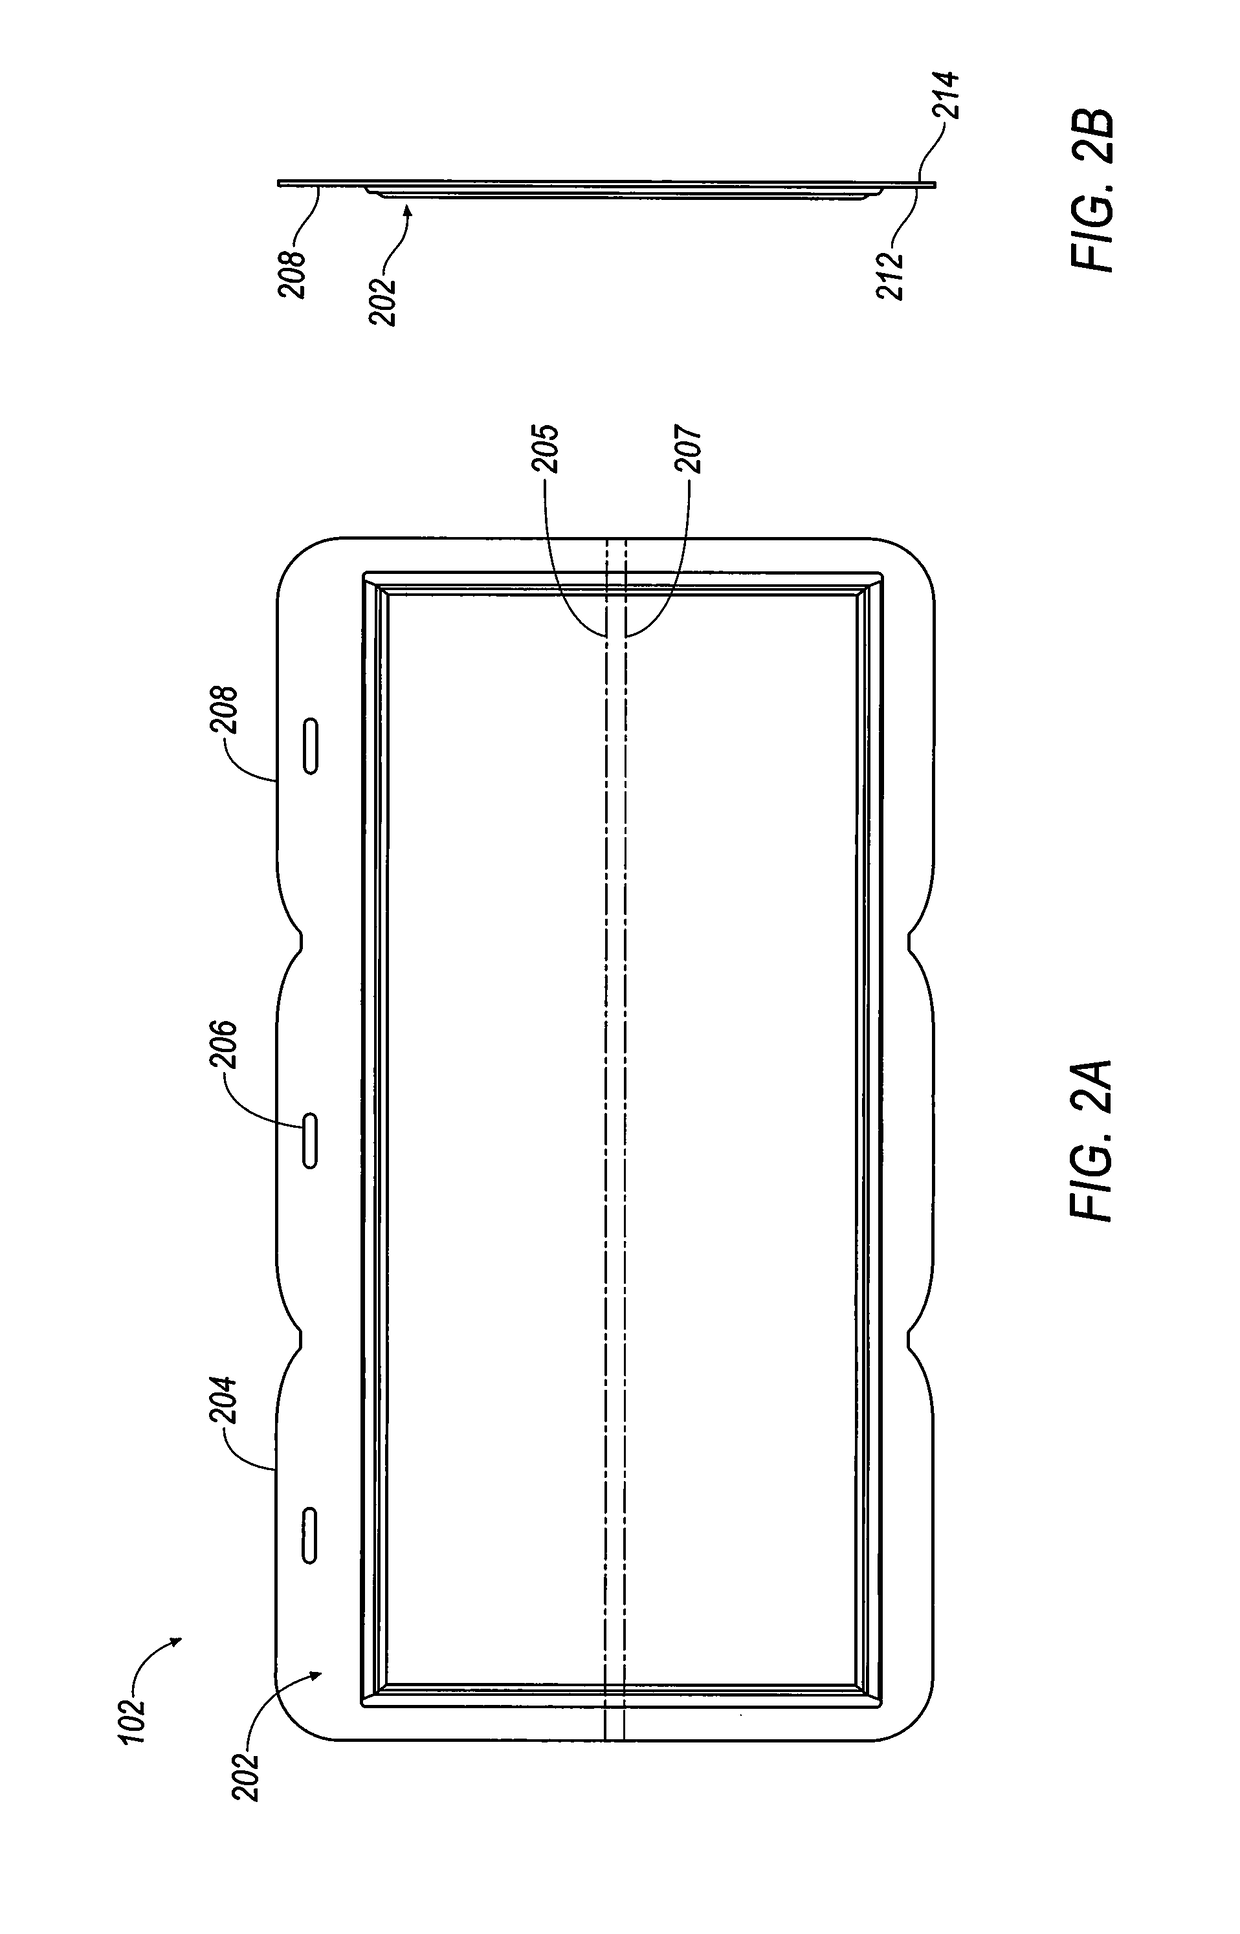 Terminal assembly for bipolar electrochemical cell or battery